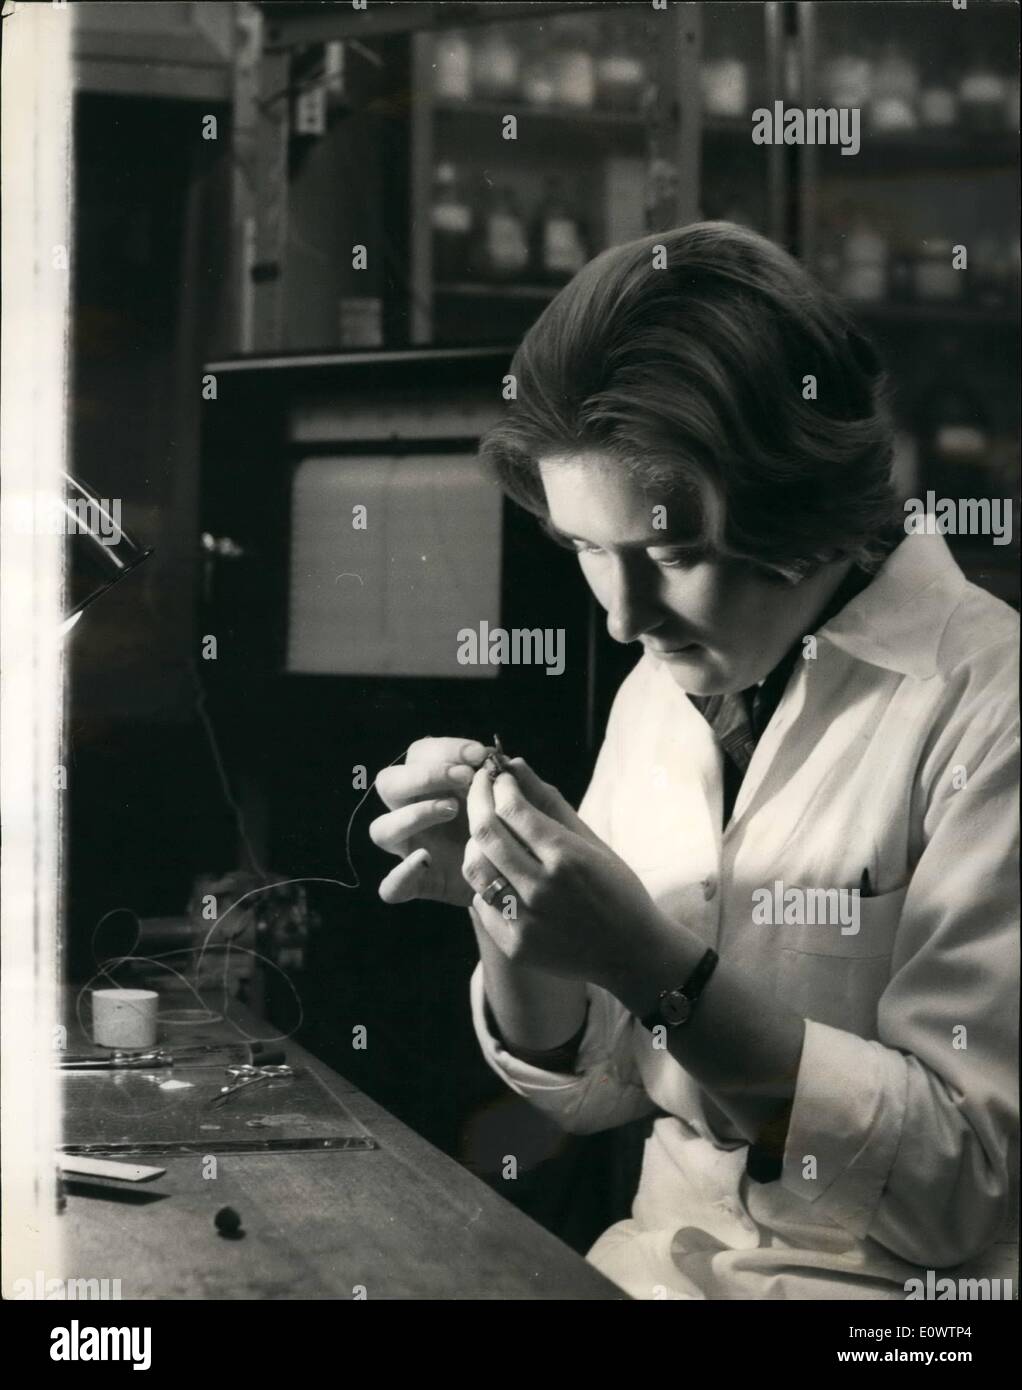 Mar. 03, 1964 - It's a million to one You'll never Guess. What is this young lady doing? Threading a needle? Sewing? Beading? . Stock Photo